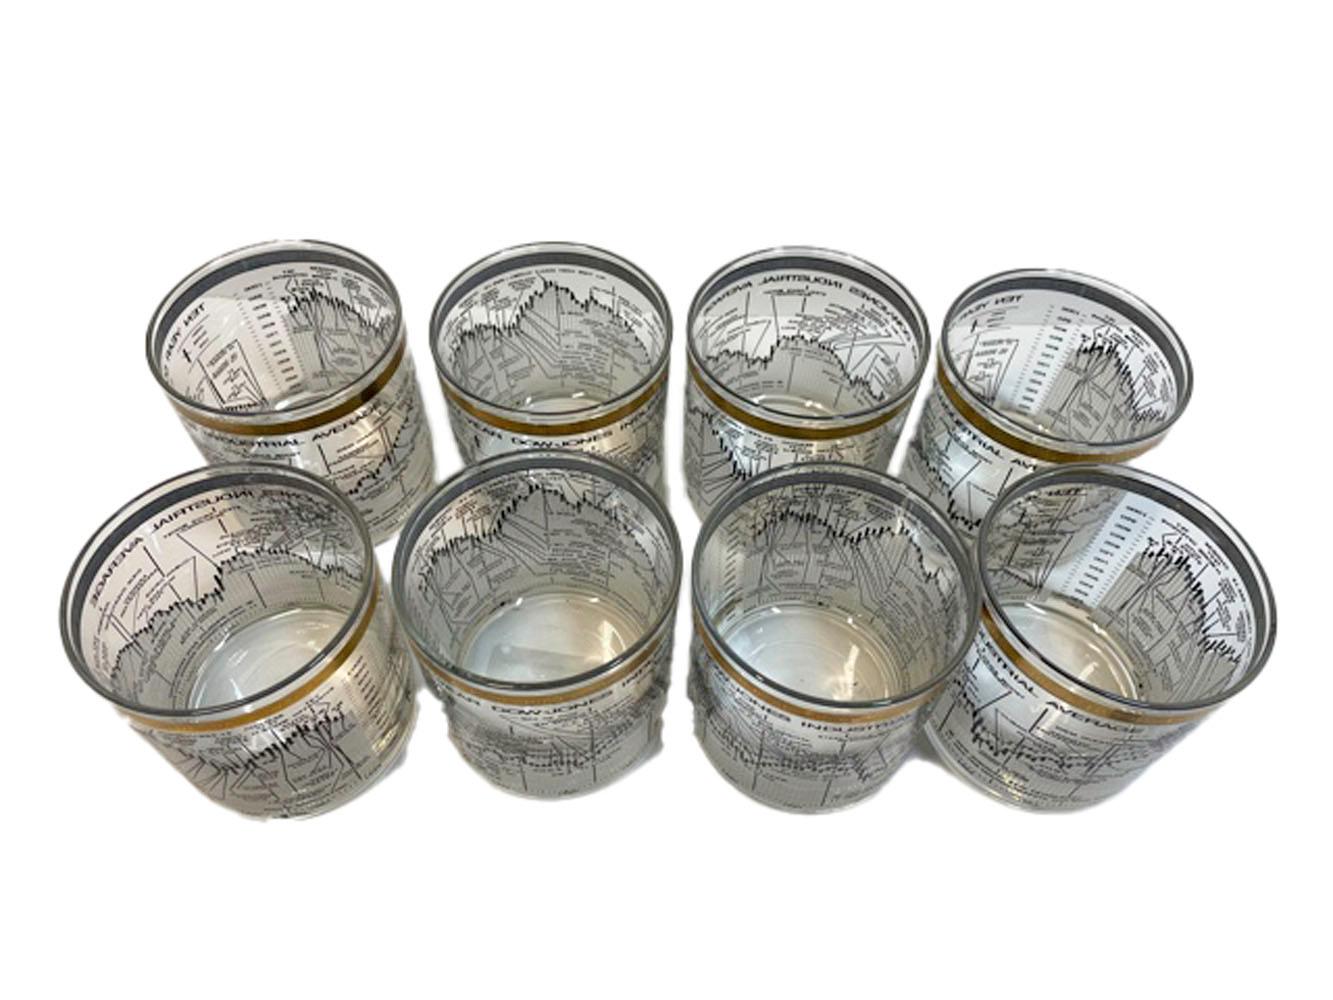 8 Mid-century rocks glasses by Cera Glass in the 